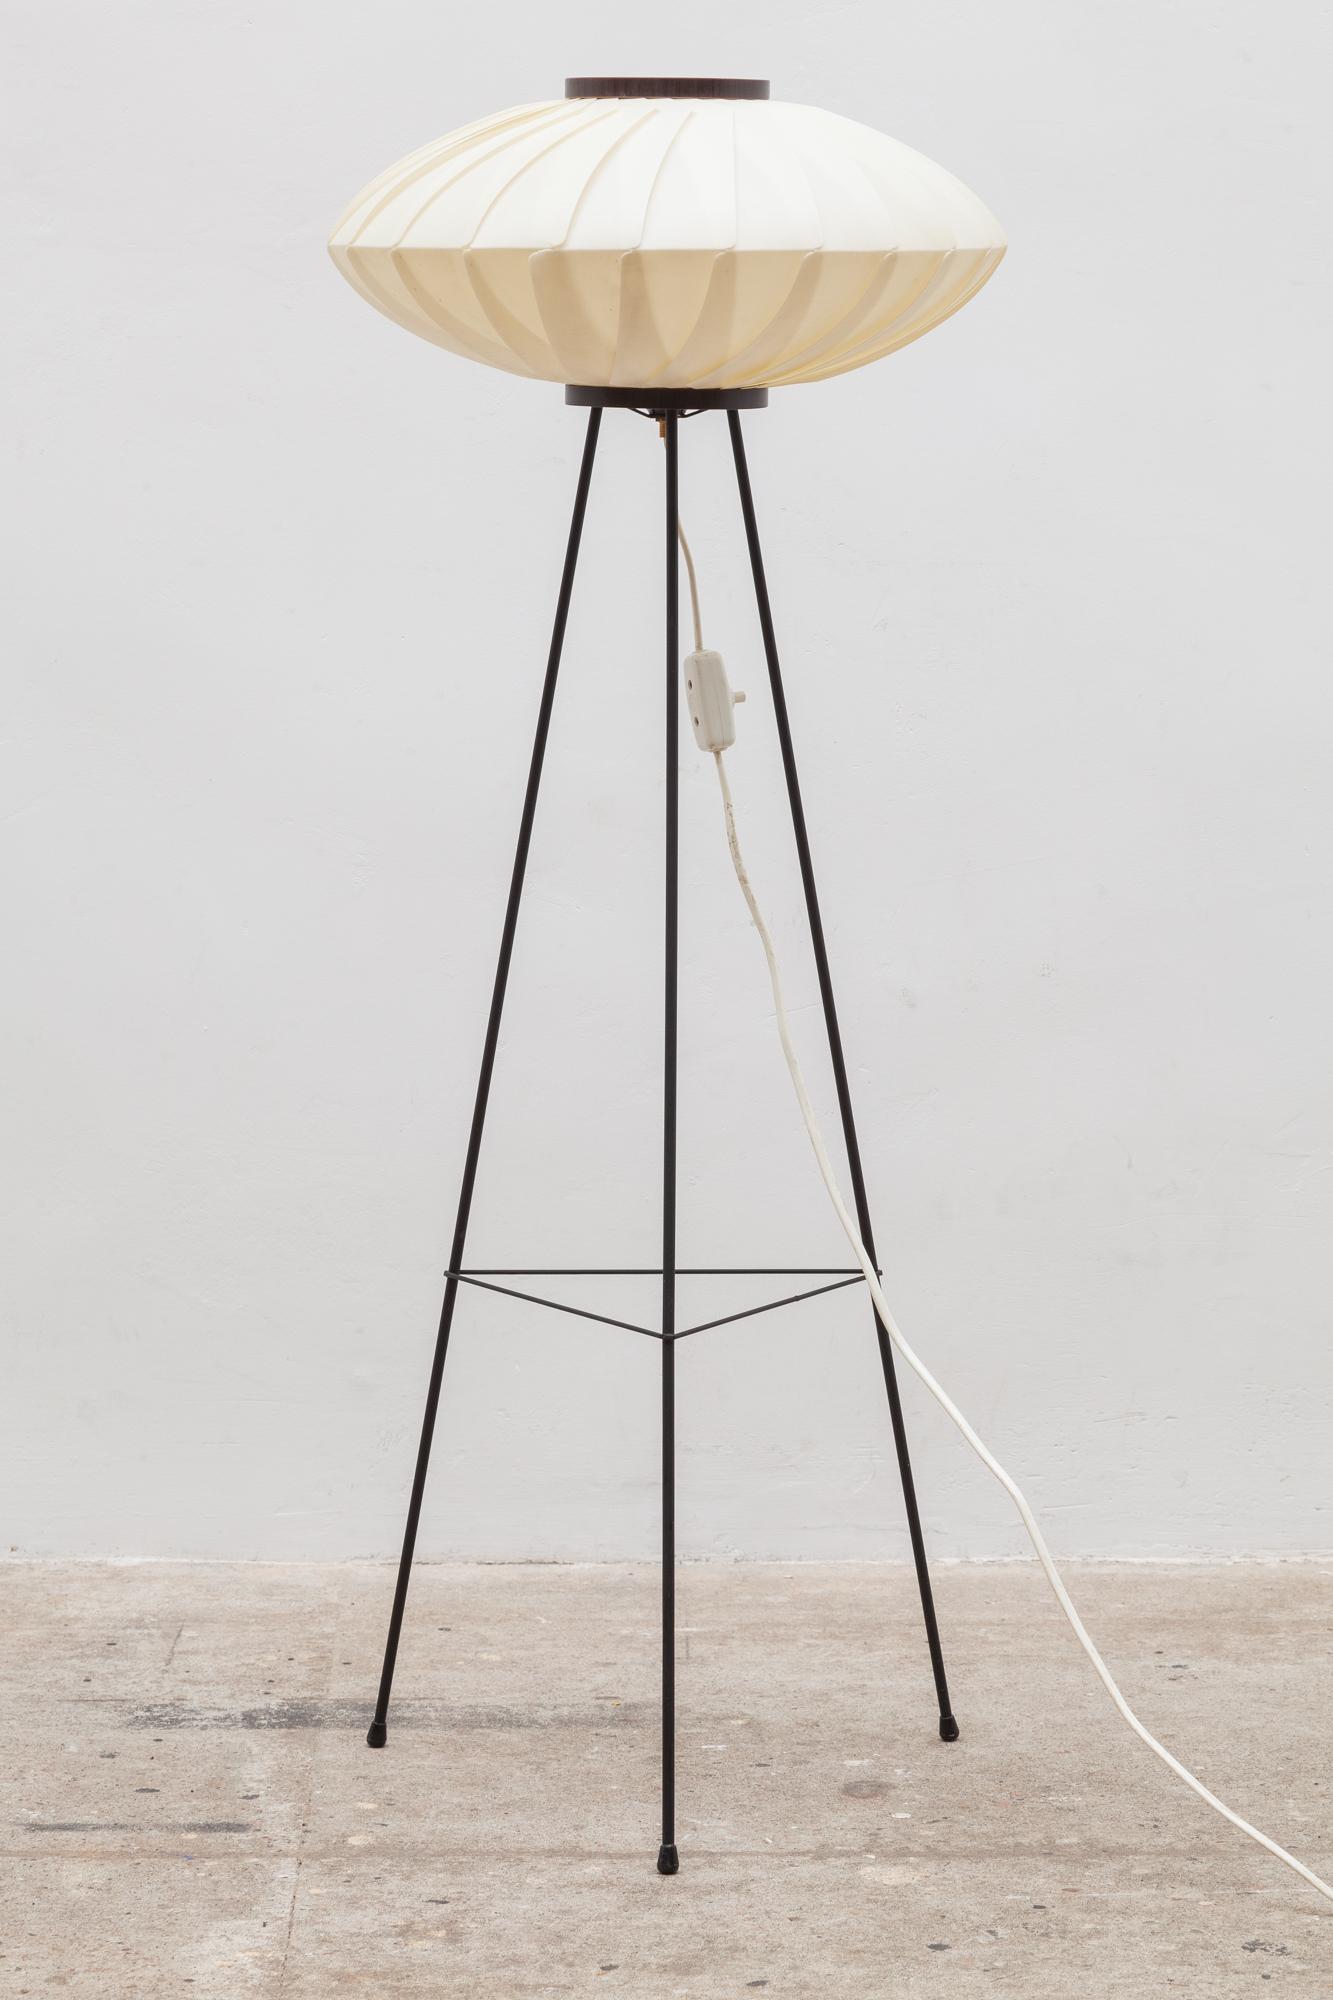 Floor-lamp attributed to ASEA in Sweden during the 1960s. Cocoon sprayed hand folded acrylic shade. Very good vintage condition.The tripod is made out of black lacquered steel.